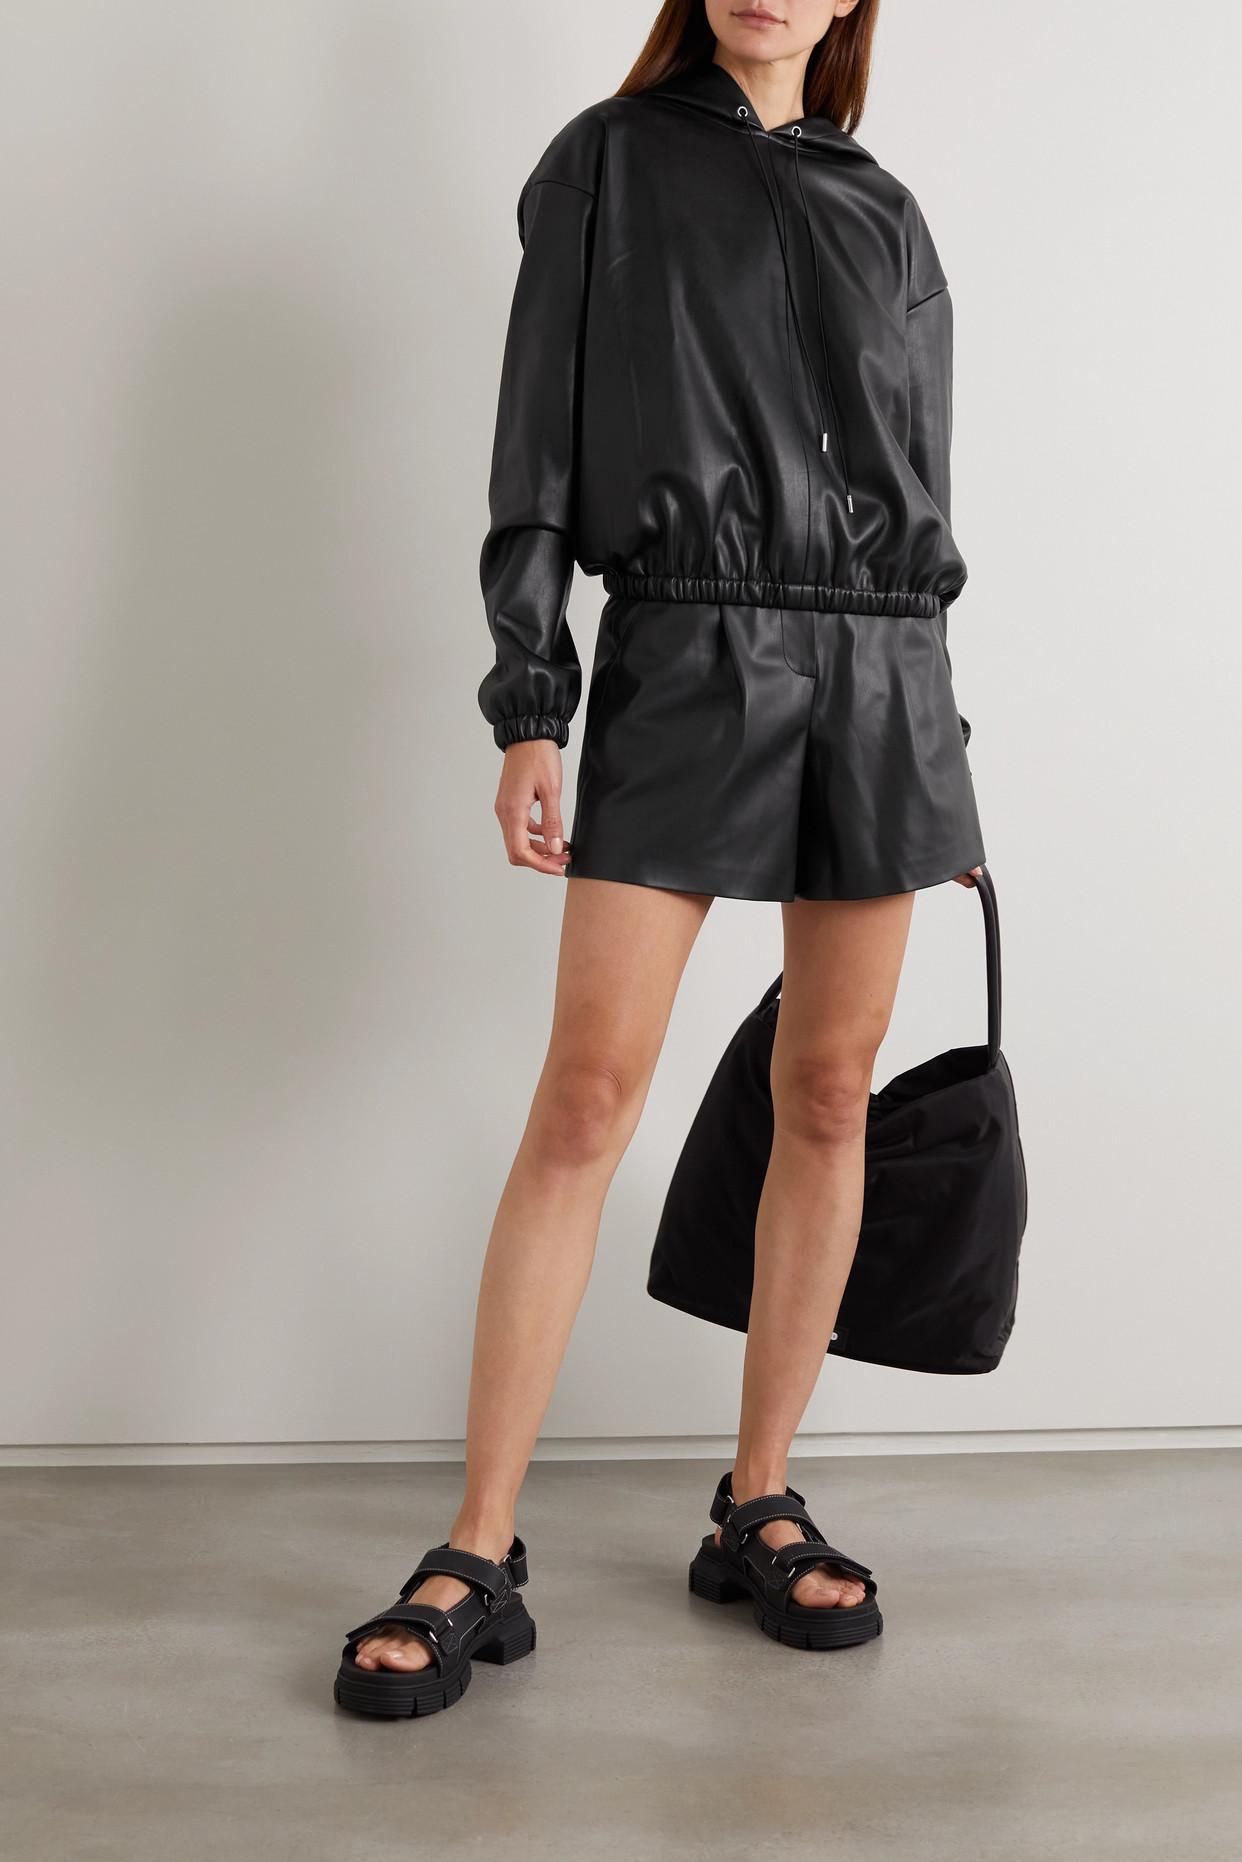 Frankie Shop Manon Pleated Faux Leather Shorts in Black - Lyst